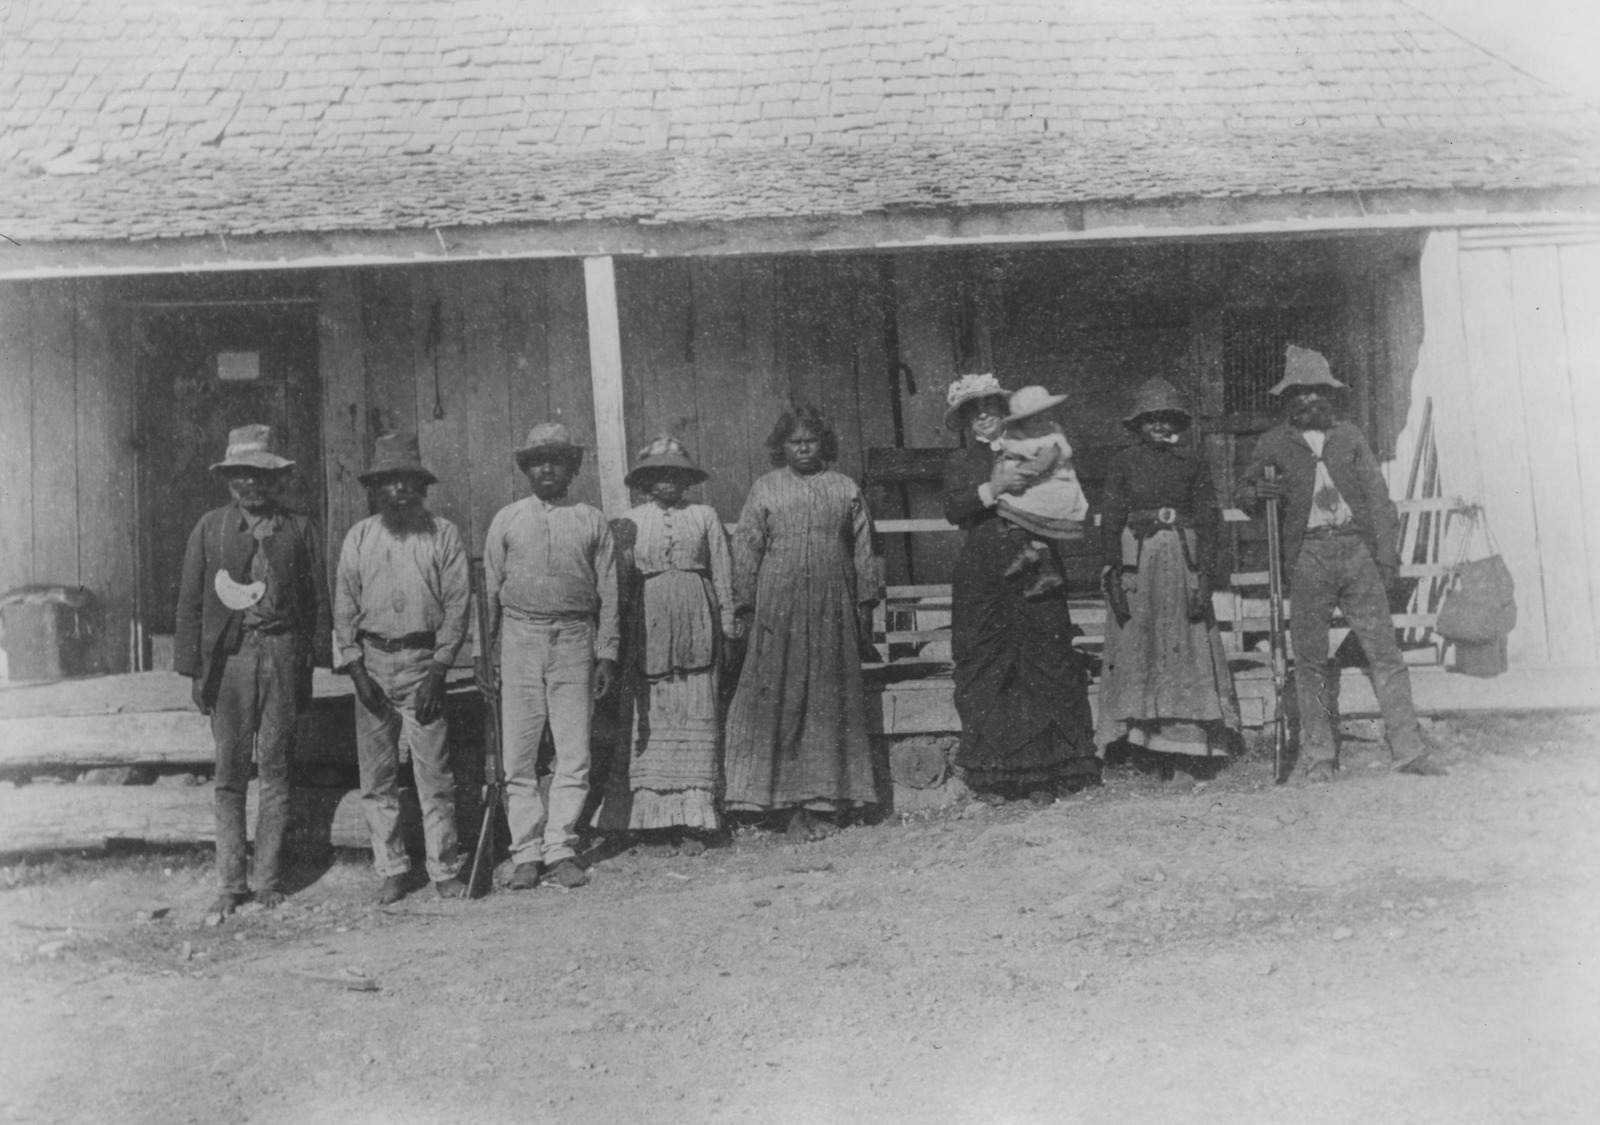 Black and white image of King Billy and group of Aboriginal people standing in front of a wooden building at Pikedale